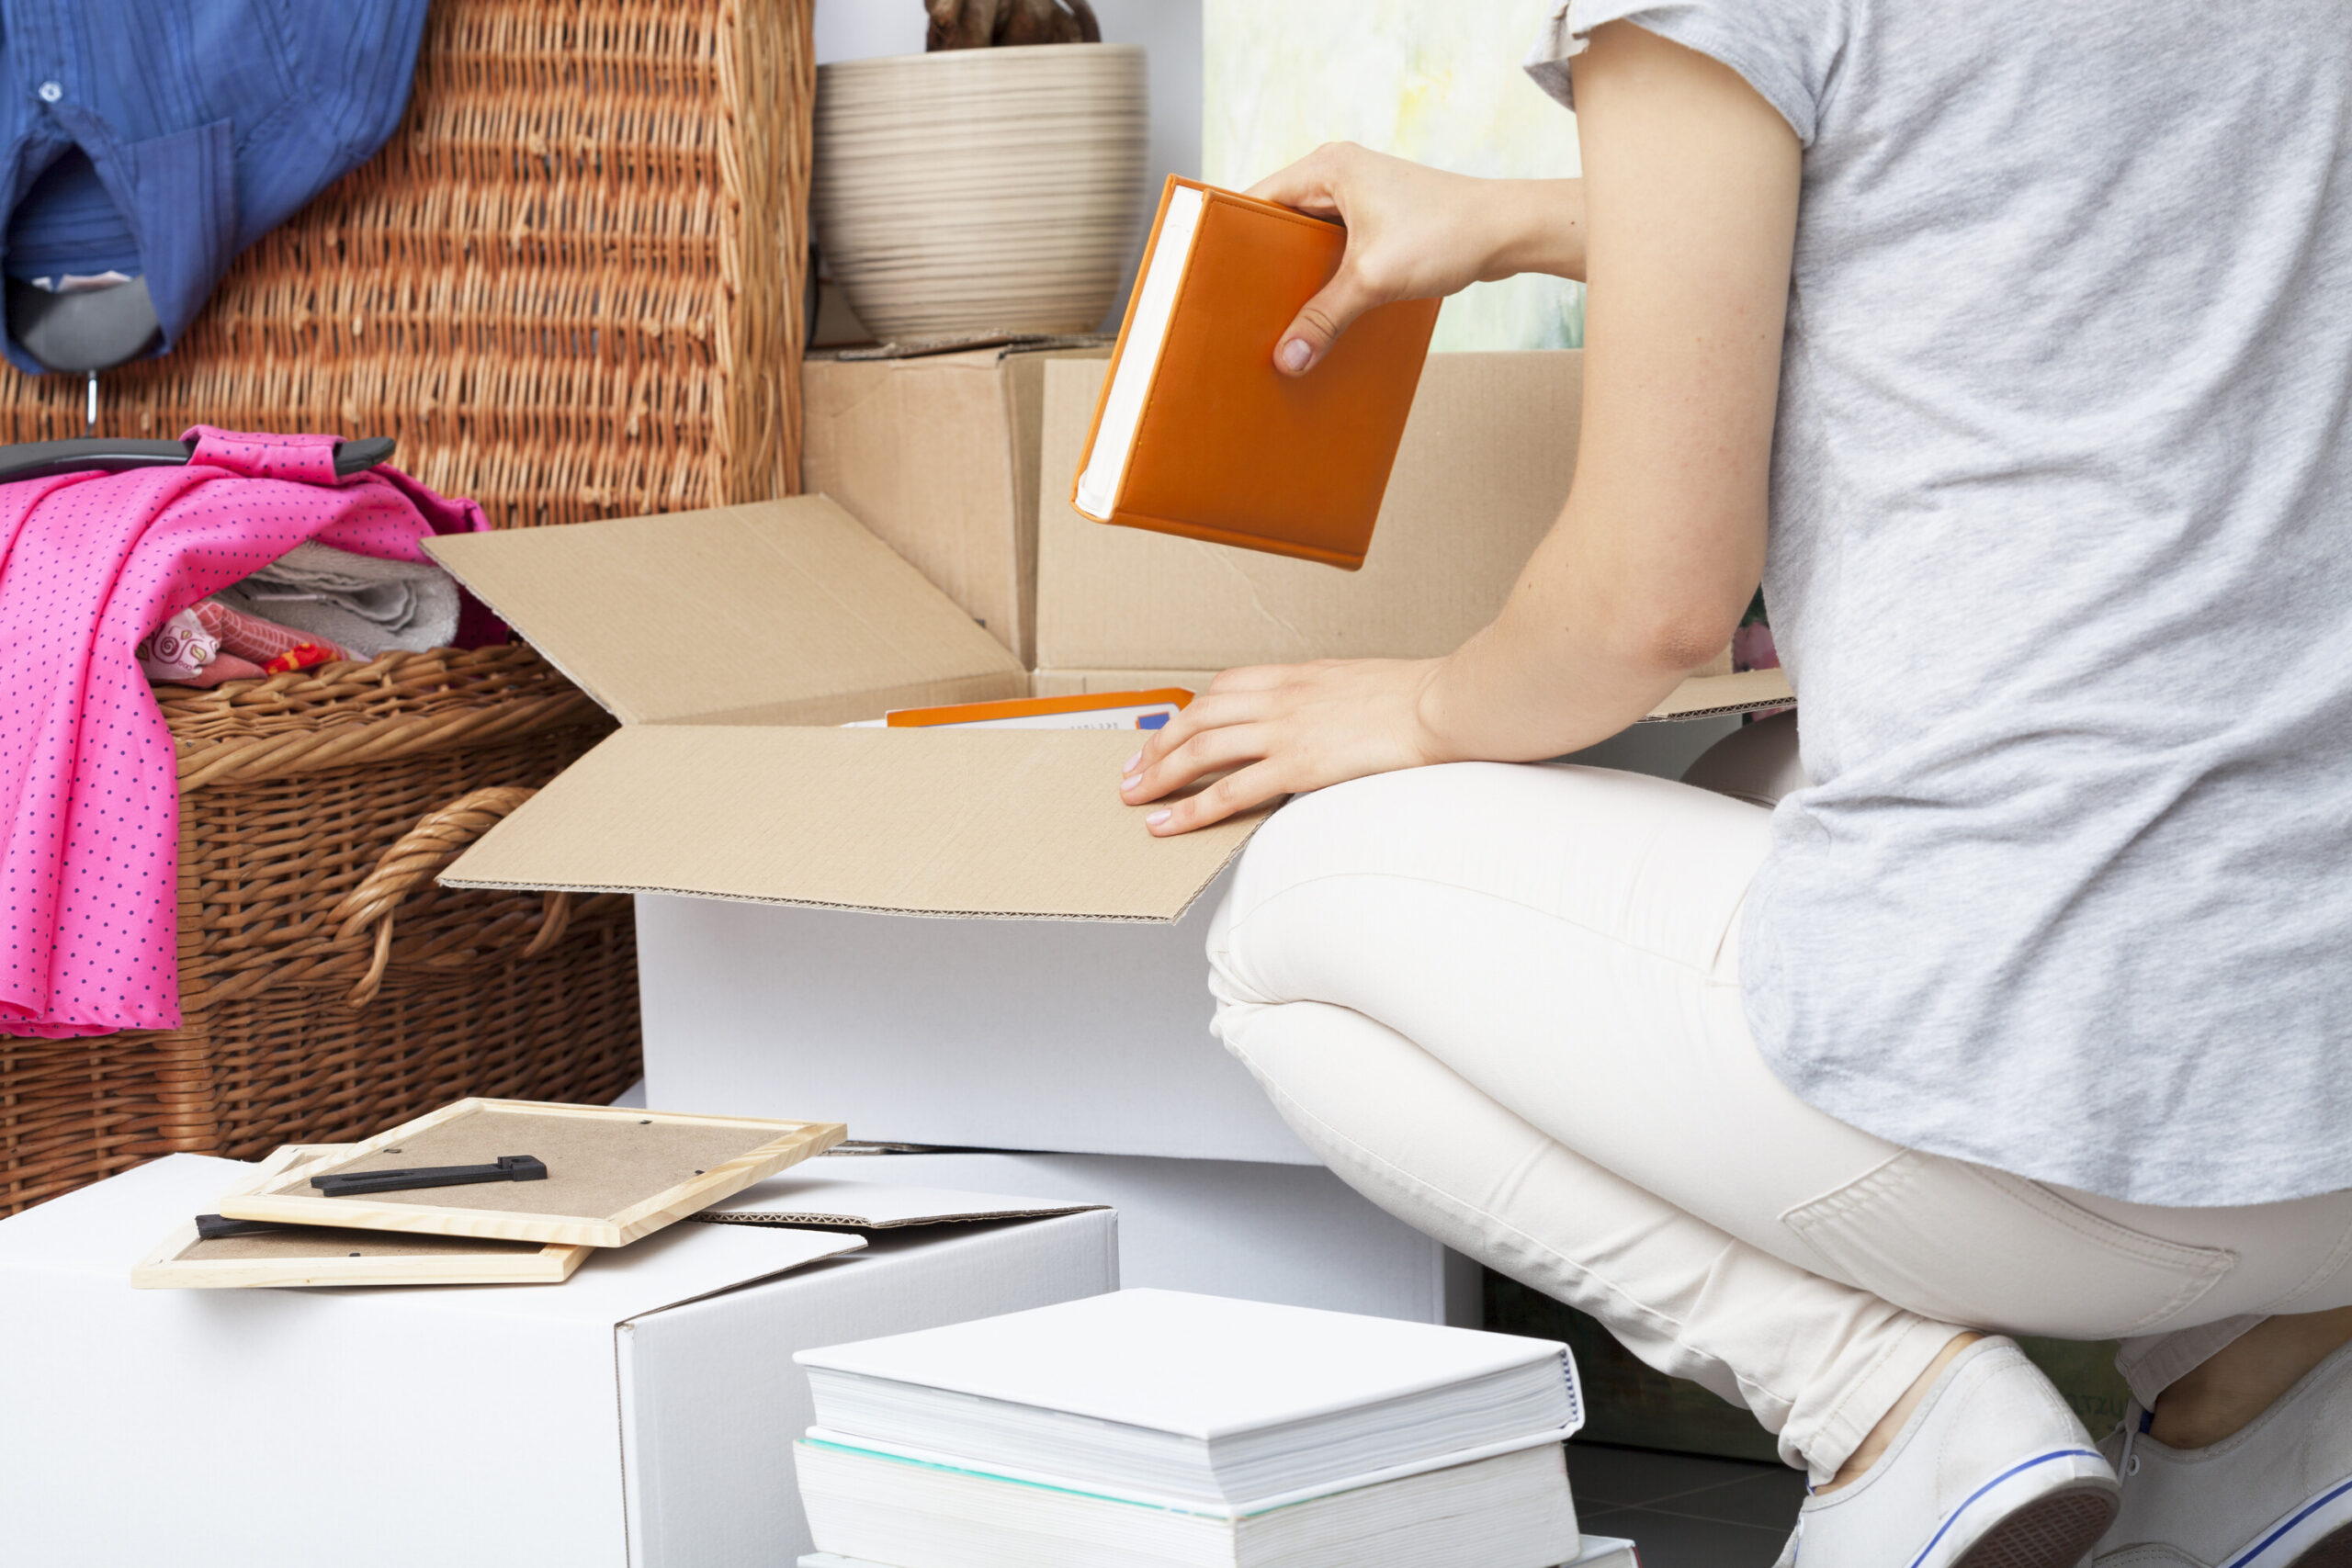 How to Determine How Long Packing for Your Move Will Take